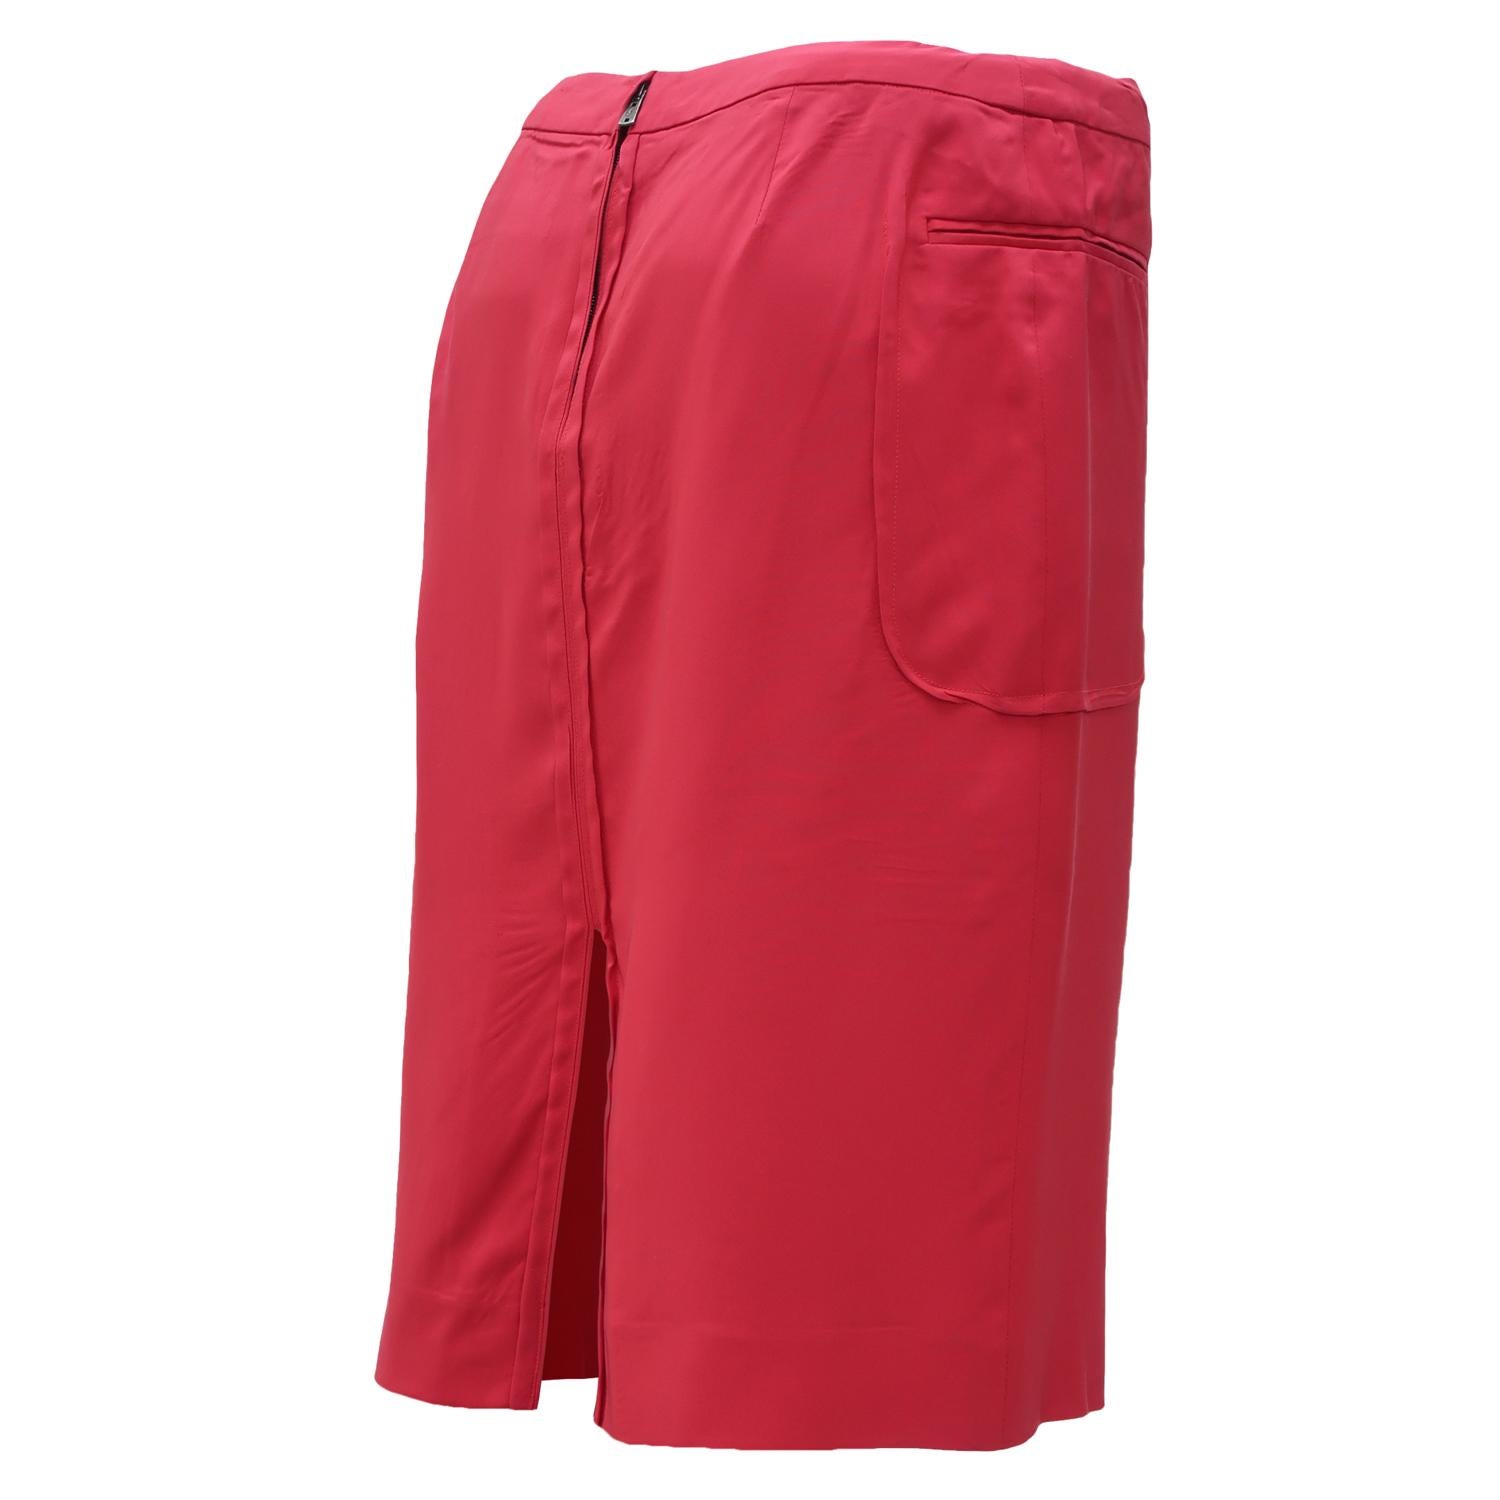 Red Yves Saint Laurent by Tom Ford SS-2002 Silk/Rayon Skirt with Pocket Detailing For Sale